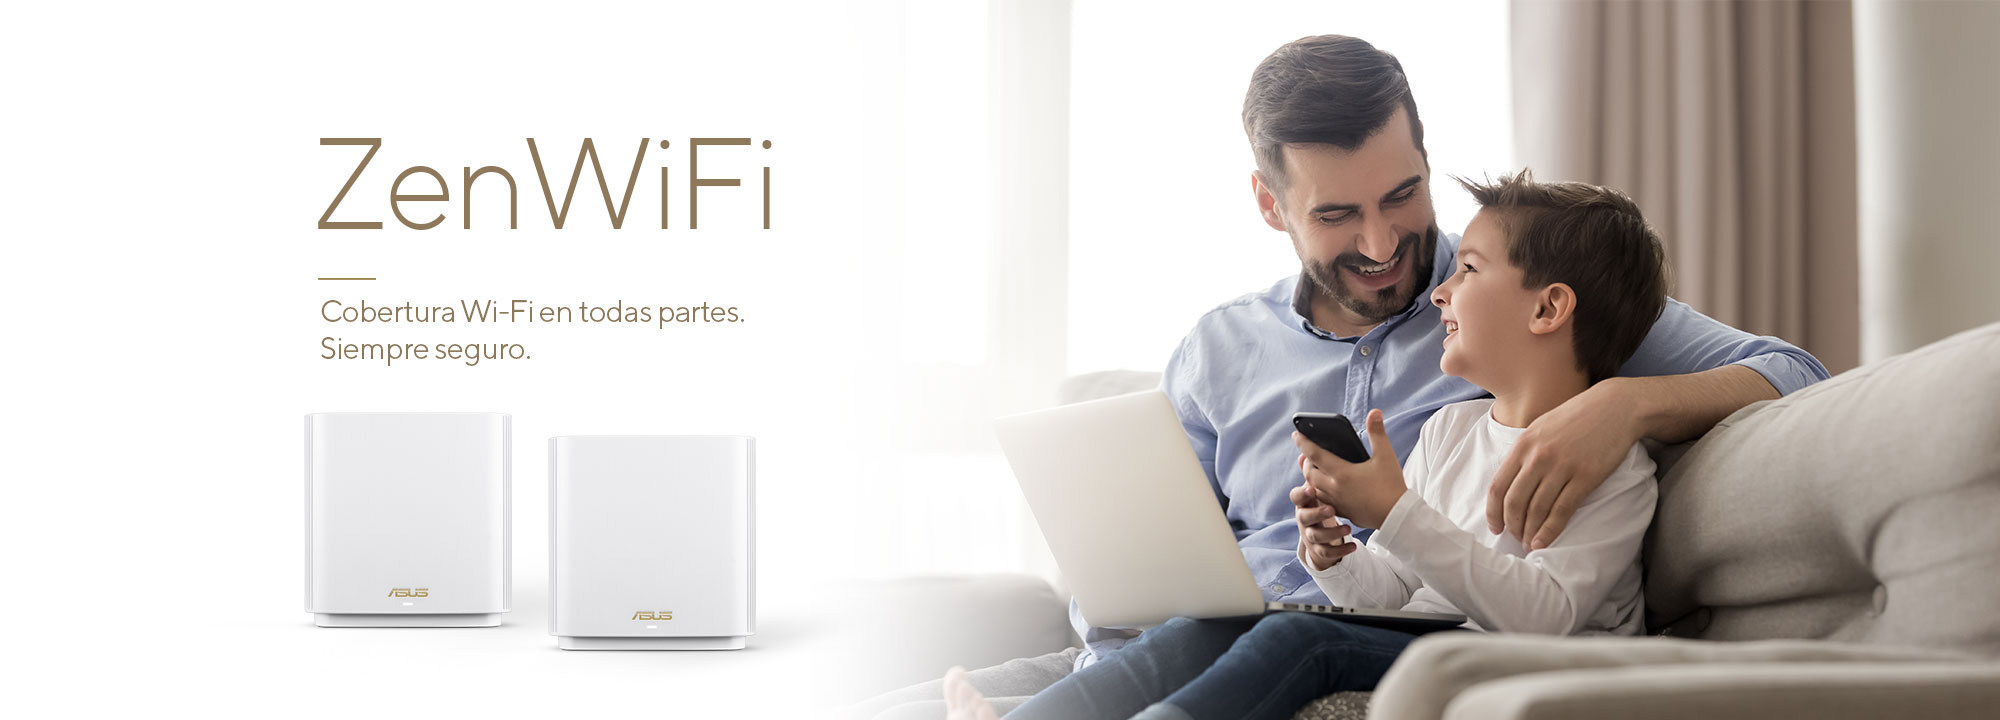 ASUS ZenWiFi is the best whole-home mesh WiFi system, providing stable and fast WiFi connectivity for all your devices.